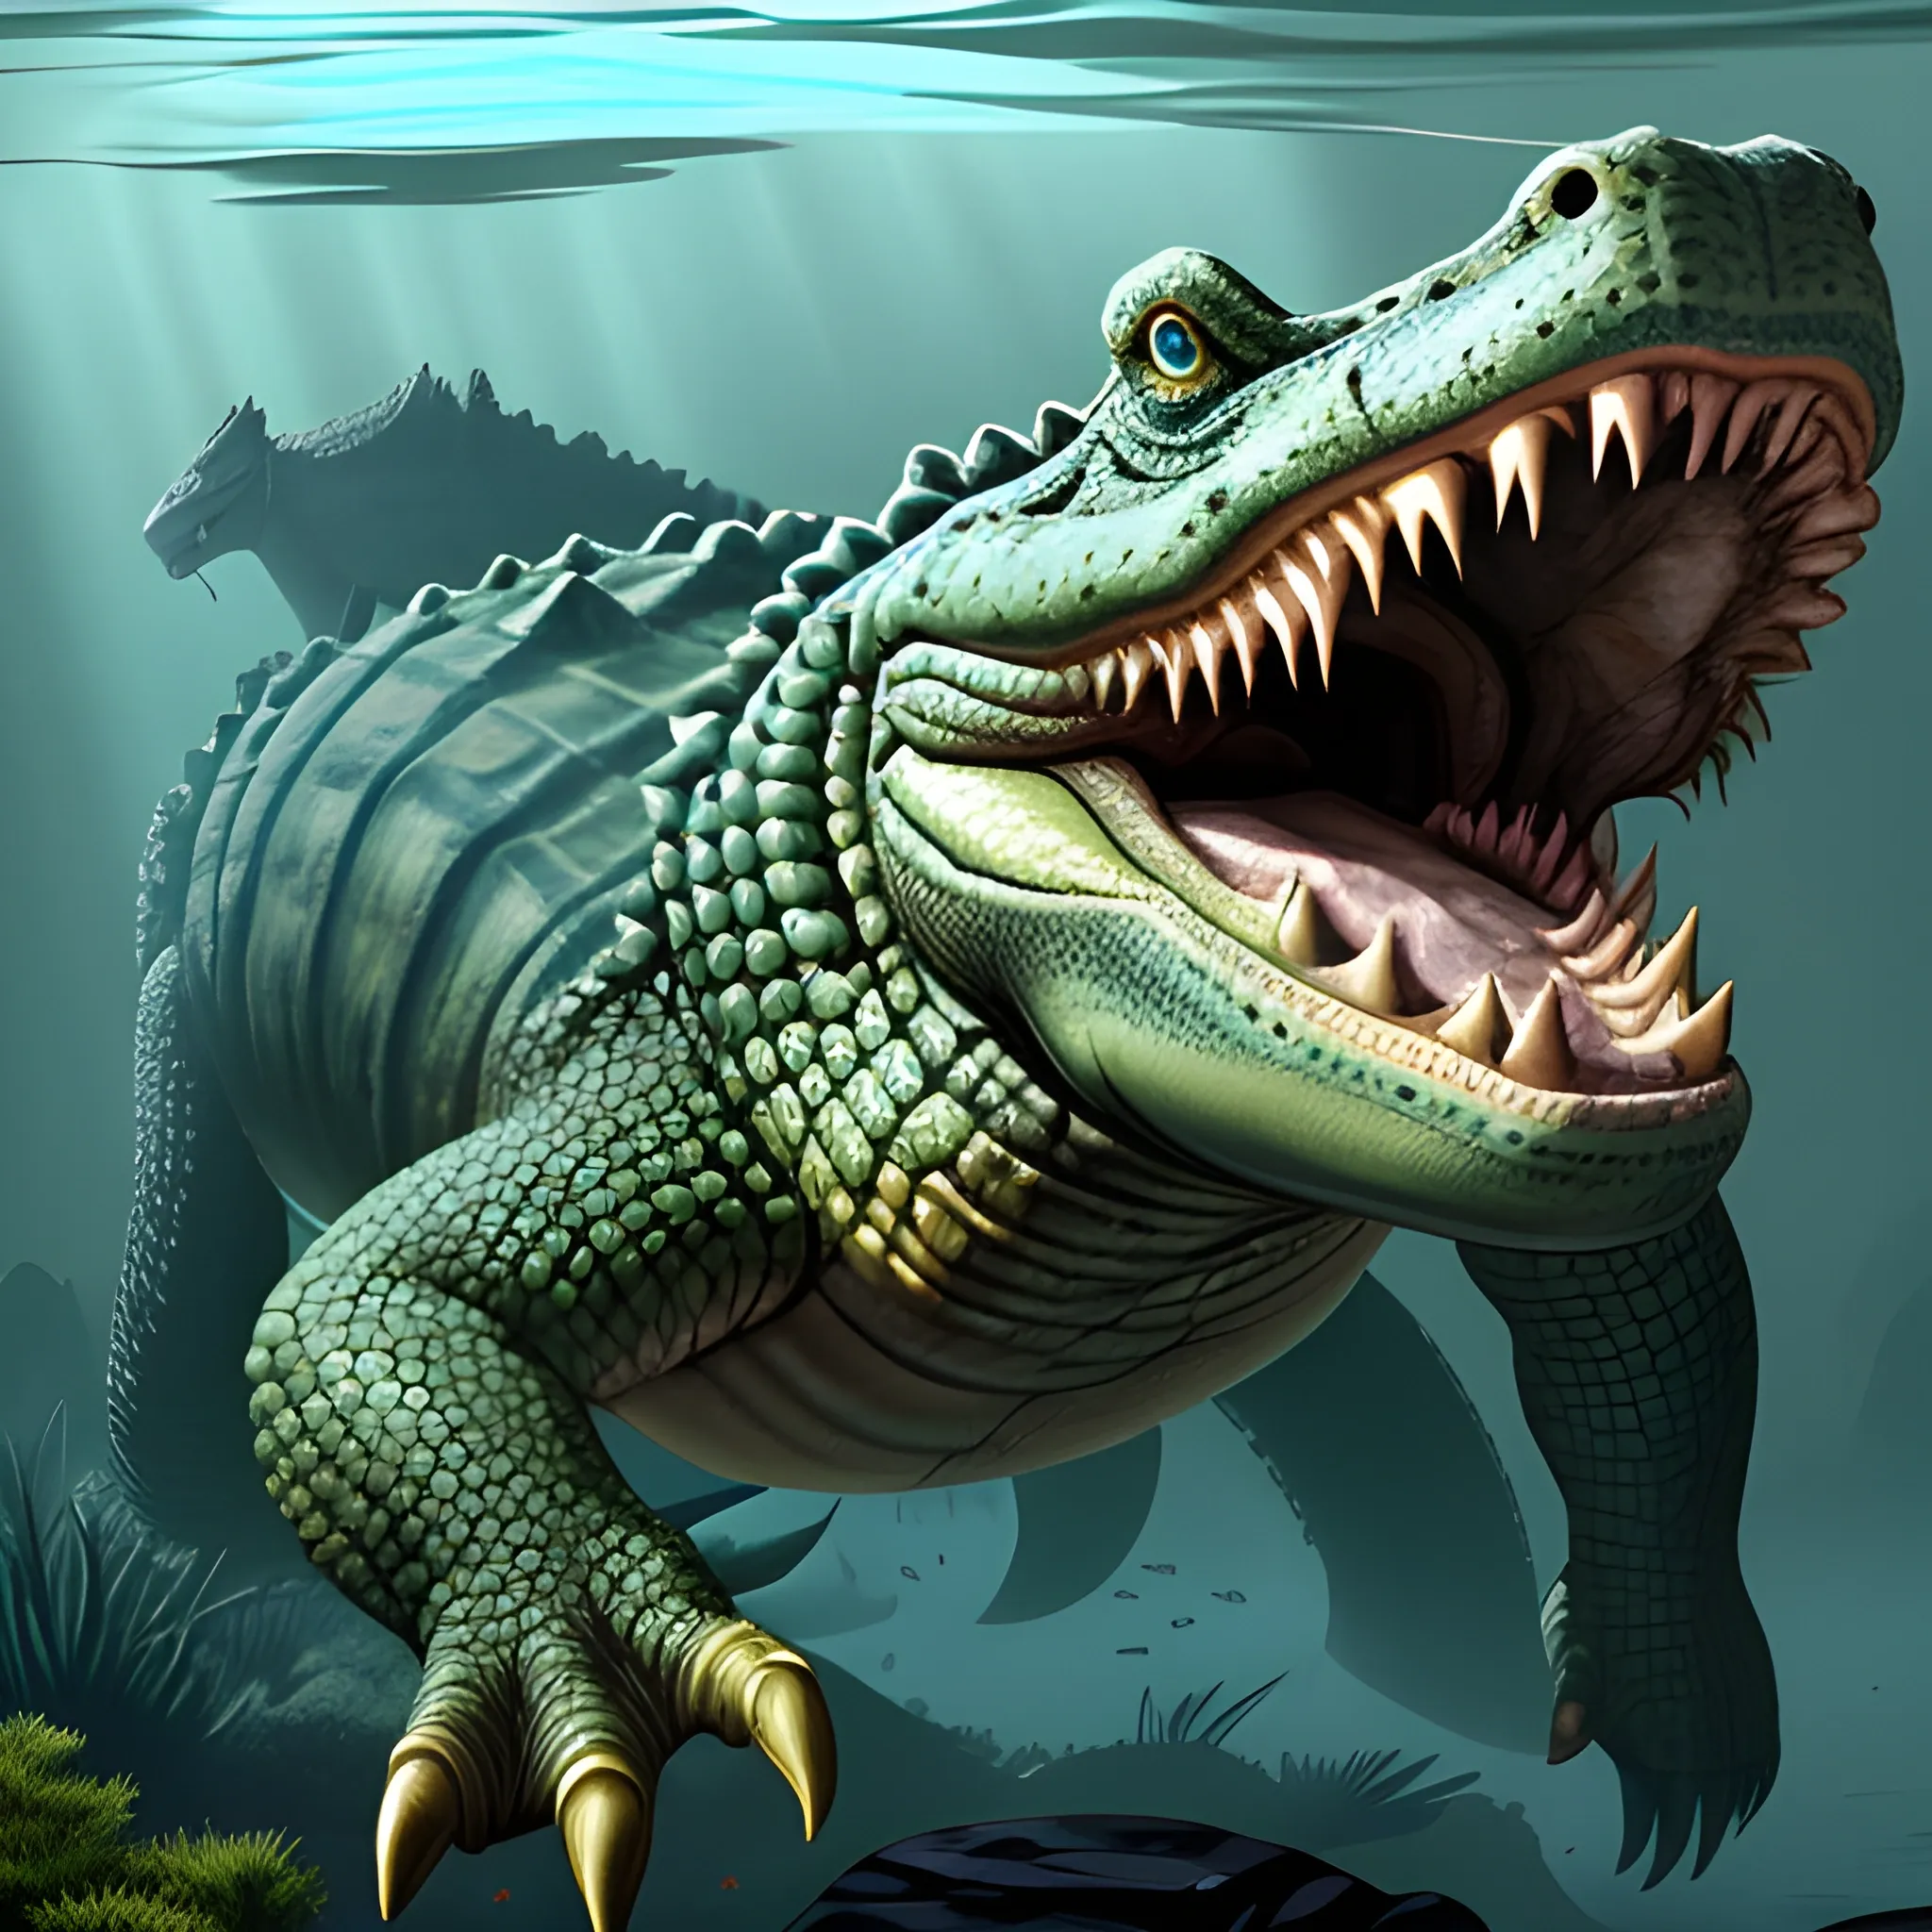 Appearance: The Giant Crocodile is an enormous and monstrous reptile, dwarfing its smaller counterpart in size and power. It has a massive body covered in thick and rugged scales that can range from dark greens to deep browns, perfectly camouflaging it in its aquatic habitat. Its long and powerful tail serves as a formidable weapon, enabling it to swim swiftly and strike with devastating force. The Giant Crocodile's eyes gleam with an intelligence and predatory instinct that sets it apart from ordinary creatures.

Features: The Giant Crocodile is a colossal apex predator, boasting immense strength and resilience. Its jaws are filled with rows of sharp teeth, capable of crushing bones and armor with ease. Unlike its smaller kin, the Giant Crocodile is fully adapted for a purely aquatic lifestyle, rarely venturing onto land except to bask in the sun or establish dominance in its territory.

Habitat: Giant Crocodiles prefer large bodies of freshwater, such as expansive rivers, deep lakes, and marshlands. They are territorial creatures, claiming vast stretches of water as their hunting grounds. In your DND world, they could inhabit mysterious swamps or hidden lagoons, guarding ancient secrets or treasures.

Behavior: As ambush predators, Giant Crocodiles are masters of surprise attacks. They remain mostly submerged, with only their eyes and nostrils visible above the water's surface. When potential prey ventures too close, the Giant Crocodile strikes with astonishing speed and strength, dragging victims underwater to drown or consume.

Role in the World: In your DND world, Giant Crocodiles could be legendary creatures, feared and respected by both locals and adventurers alike. They might be considered as guardians of ancient temples or revered as avatars of primordial nature. Druids and rangers might see them as symbols of untamed and primal power.

Encountering a Giant Crocodile in the wild is a dangerous and potentially deadly event for adventurers. Its size and power make it an incredibly challenging opponent, even for a well-prepared party. Players must exercise extreme caution when navigating bodies of water known to be inhabited by Giant Crocodiles, as these creatures can deliver swift and lethal attacks.

The presence of Giant Crocodiles in your campaign can create an atmosphere of danger and trepidation when exploring swampy and aquatic environments. Players will need to be constantly vigilant and employ strategic thinking to avoid becoming victims of these monstrous reptiles. Crossing waterways or searching for hidden artifacts in areas known to be Giant Crocodile territory can create a sense of high stakes and urgency in your DND world.